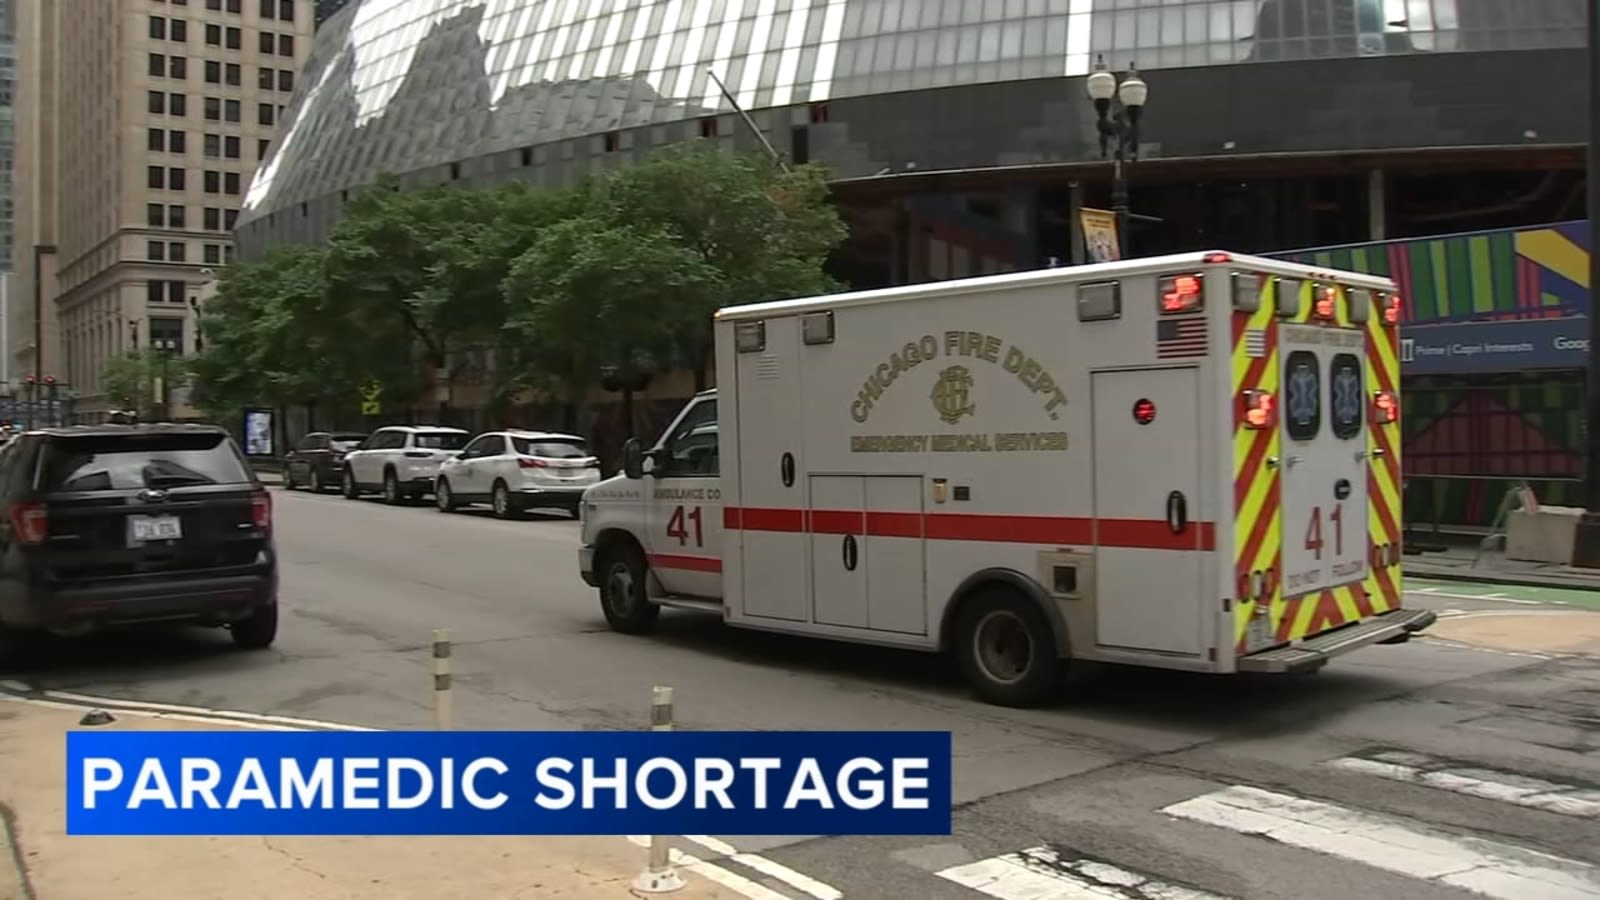 Chicago Fire Department facing paramedic shortage, union says: 'We are close to a crisis point'